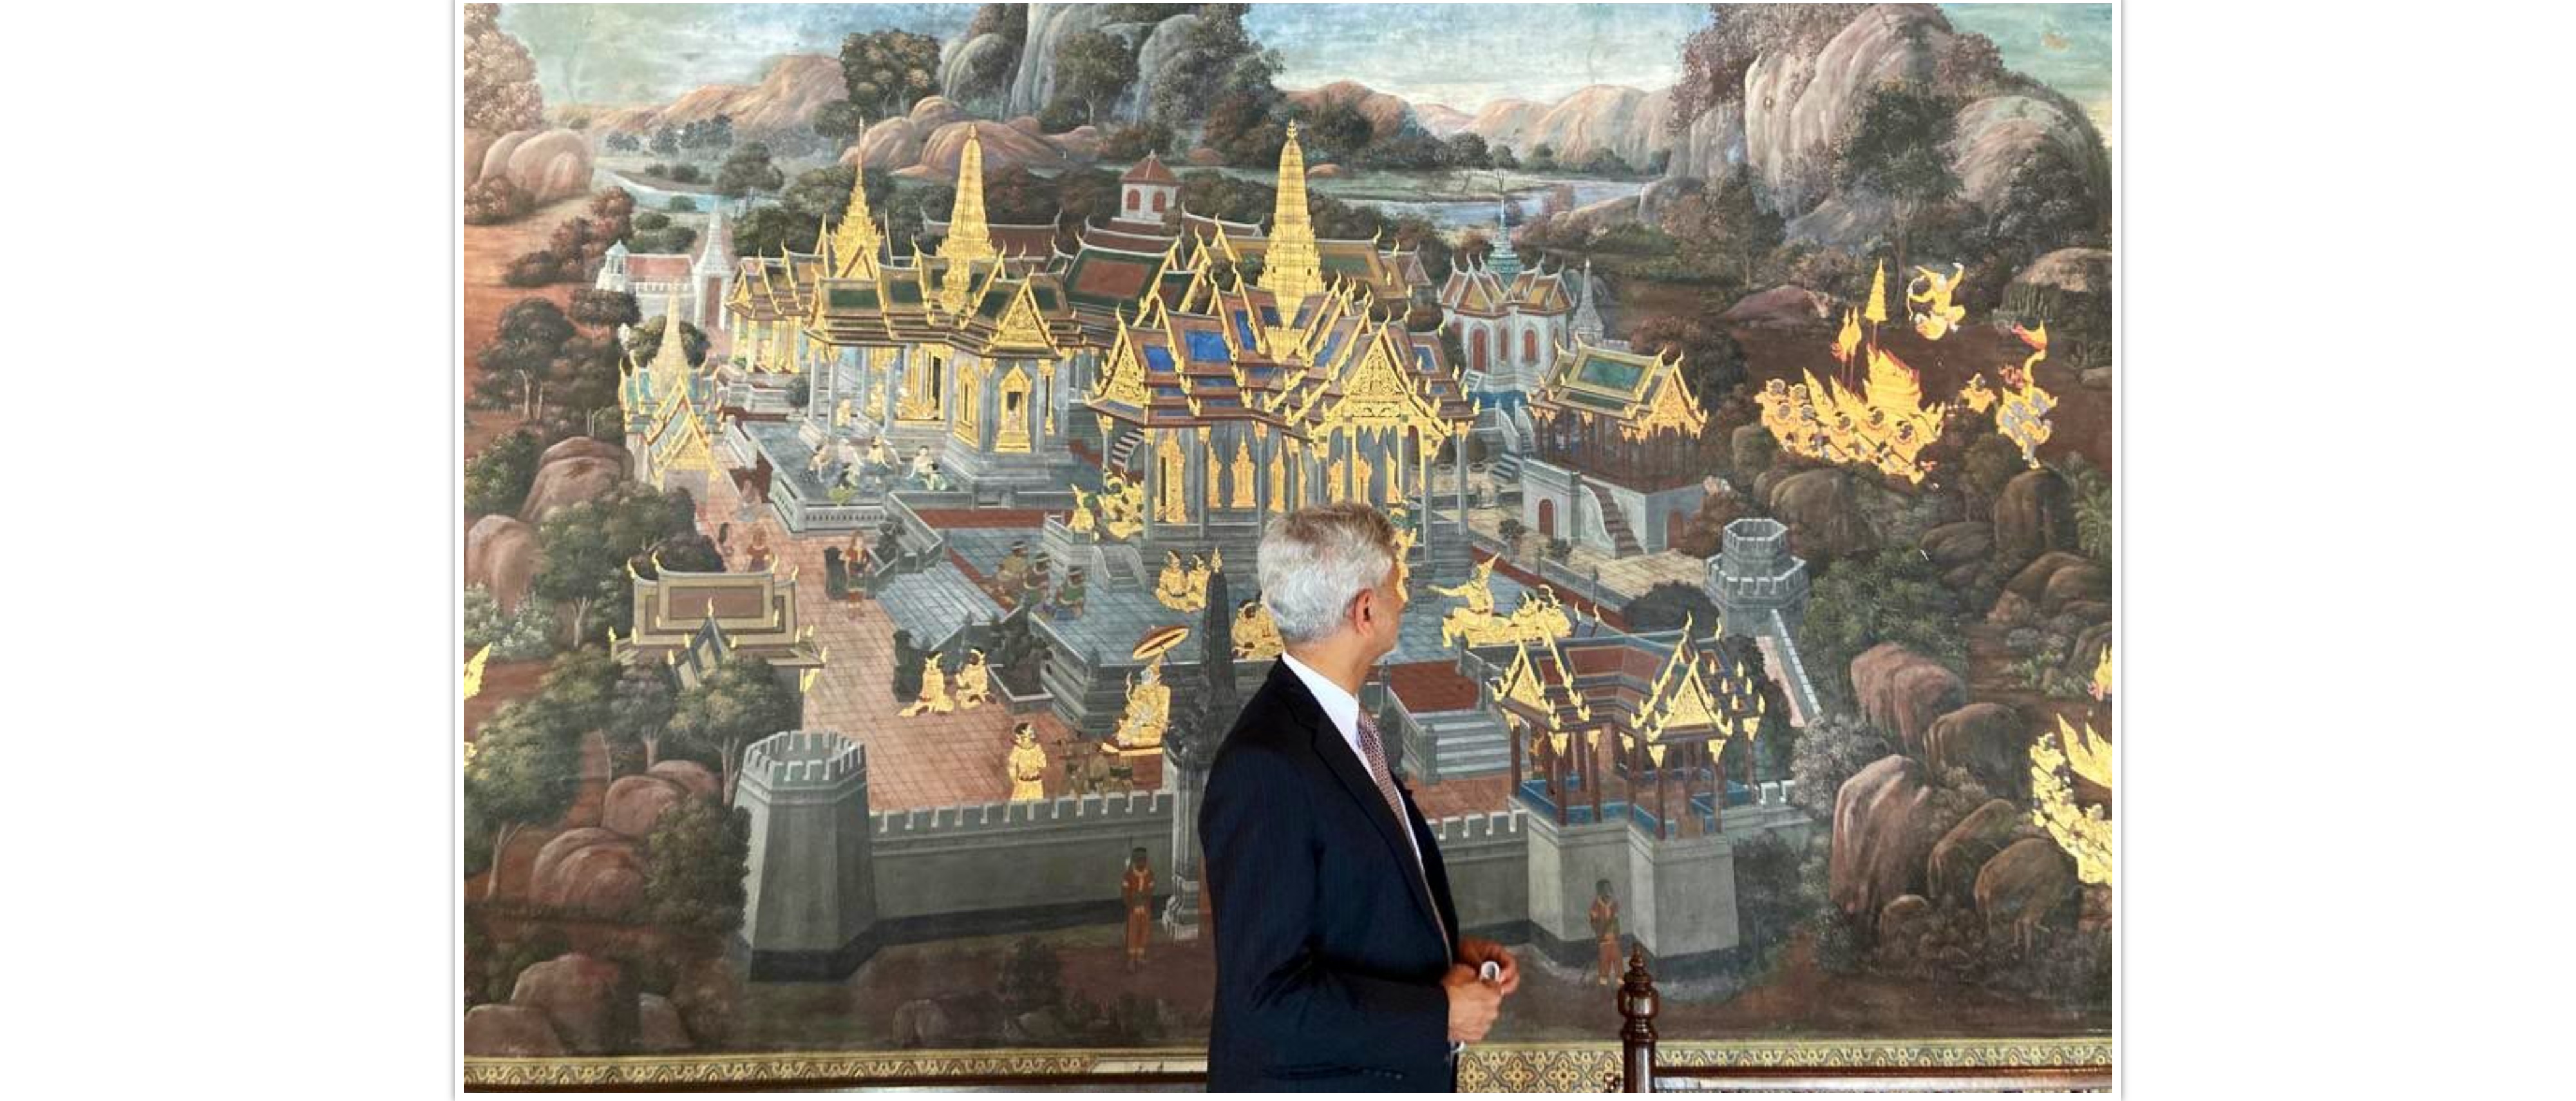  Hon’ble EAM watching Ramayana murals at the Temple of Emerald Buddha in Bangkok- 17 August 2022